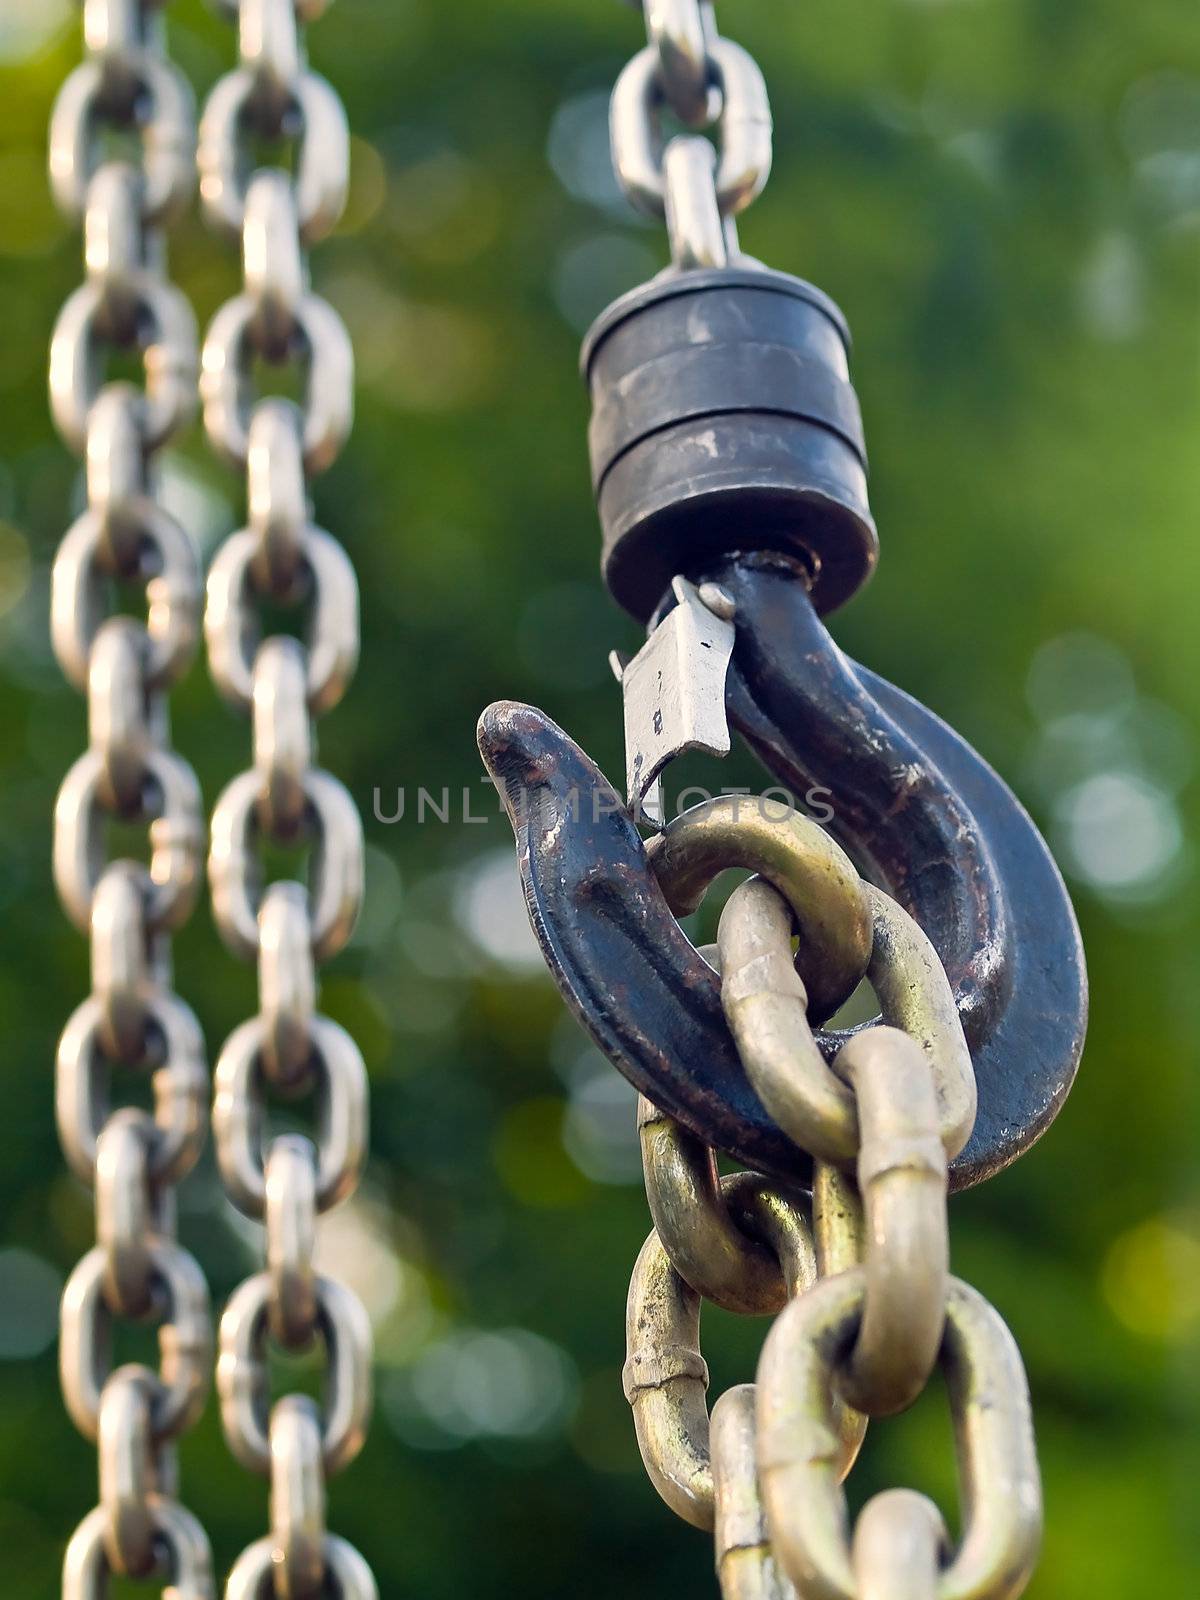 Large metal hook and chains attached to a pulley